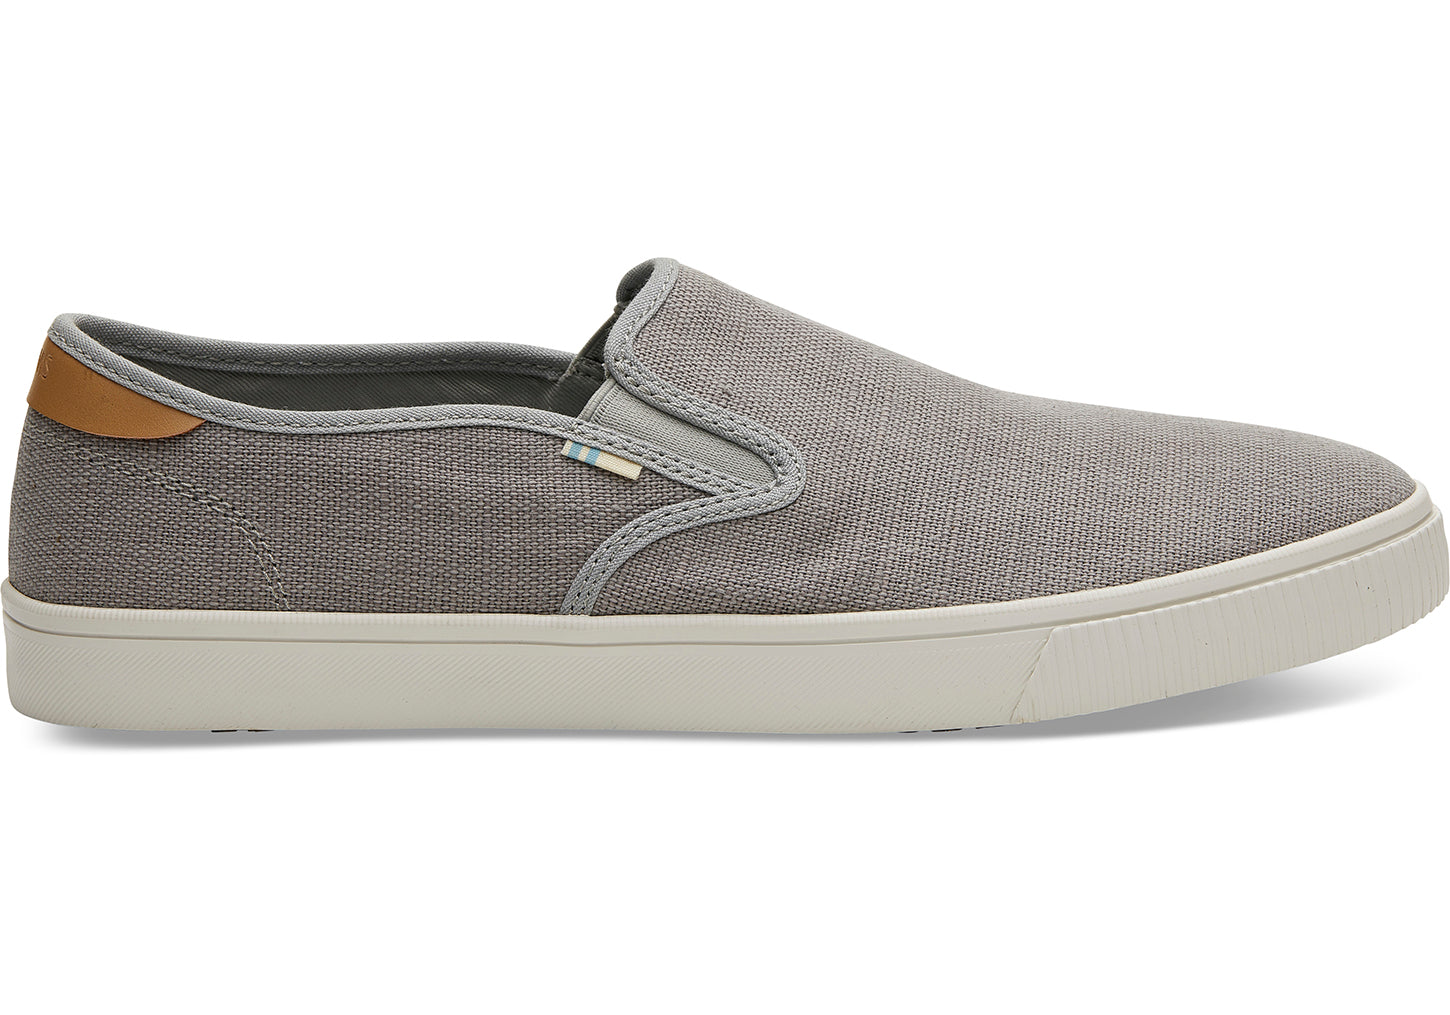 TOMS - Men's Topanga Collection Baja Drizzle Grey Heritage Canvas Slip-Ons